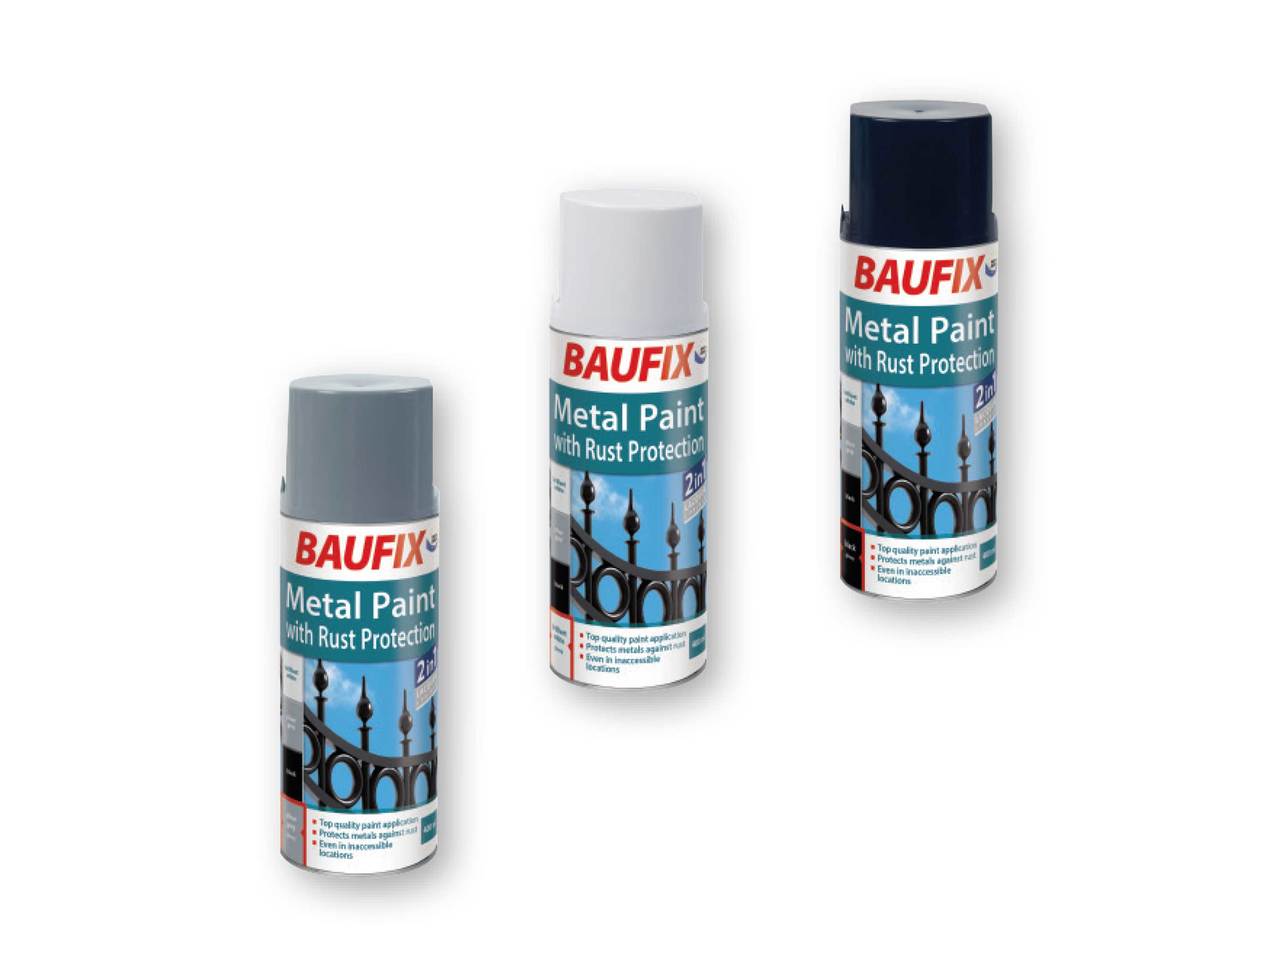 BAUFIX Metal Spray Paint with Rust Protection